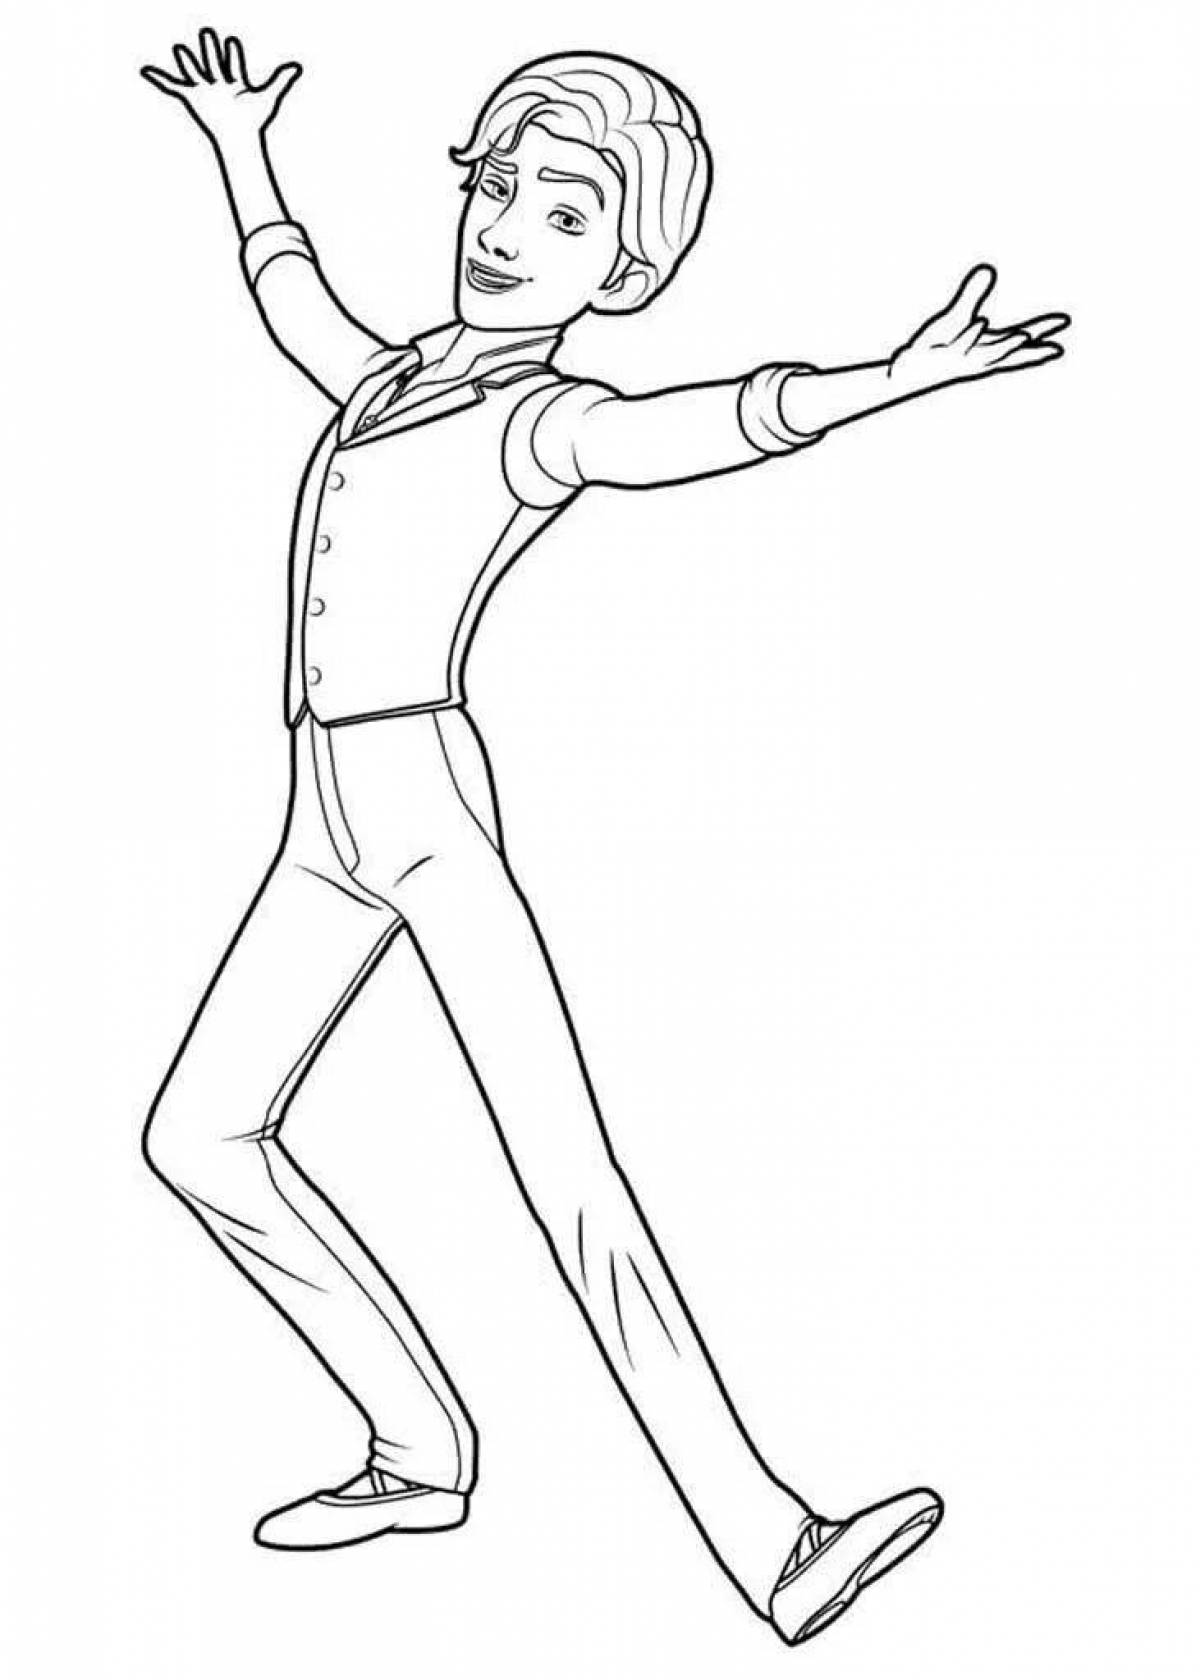 Exciting dance coloring book